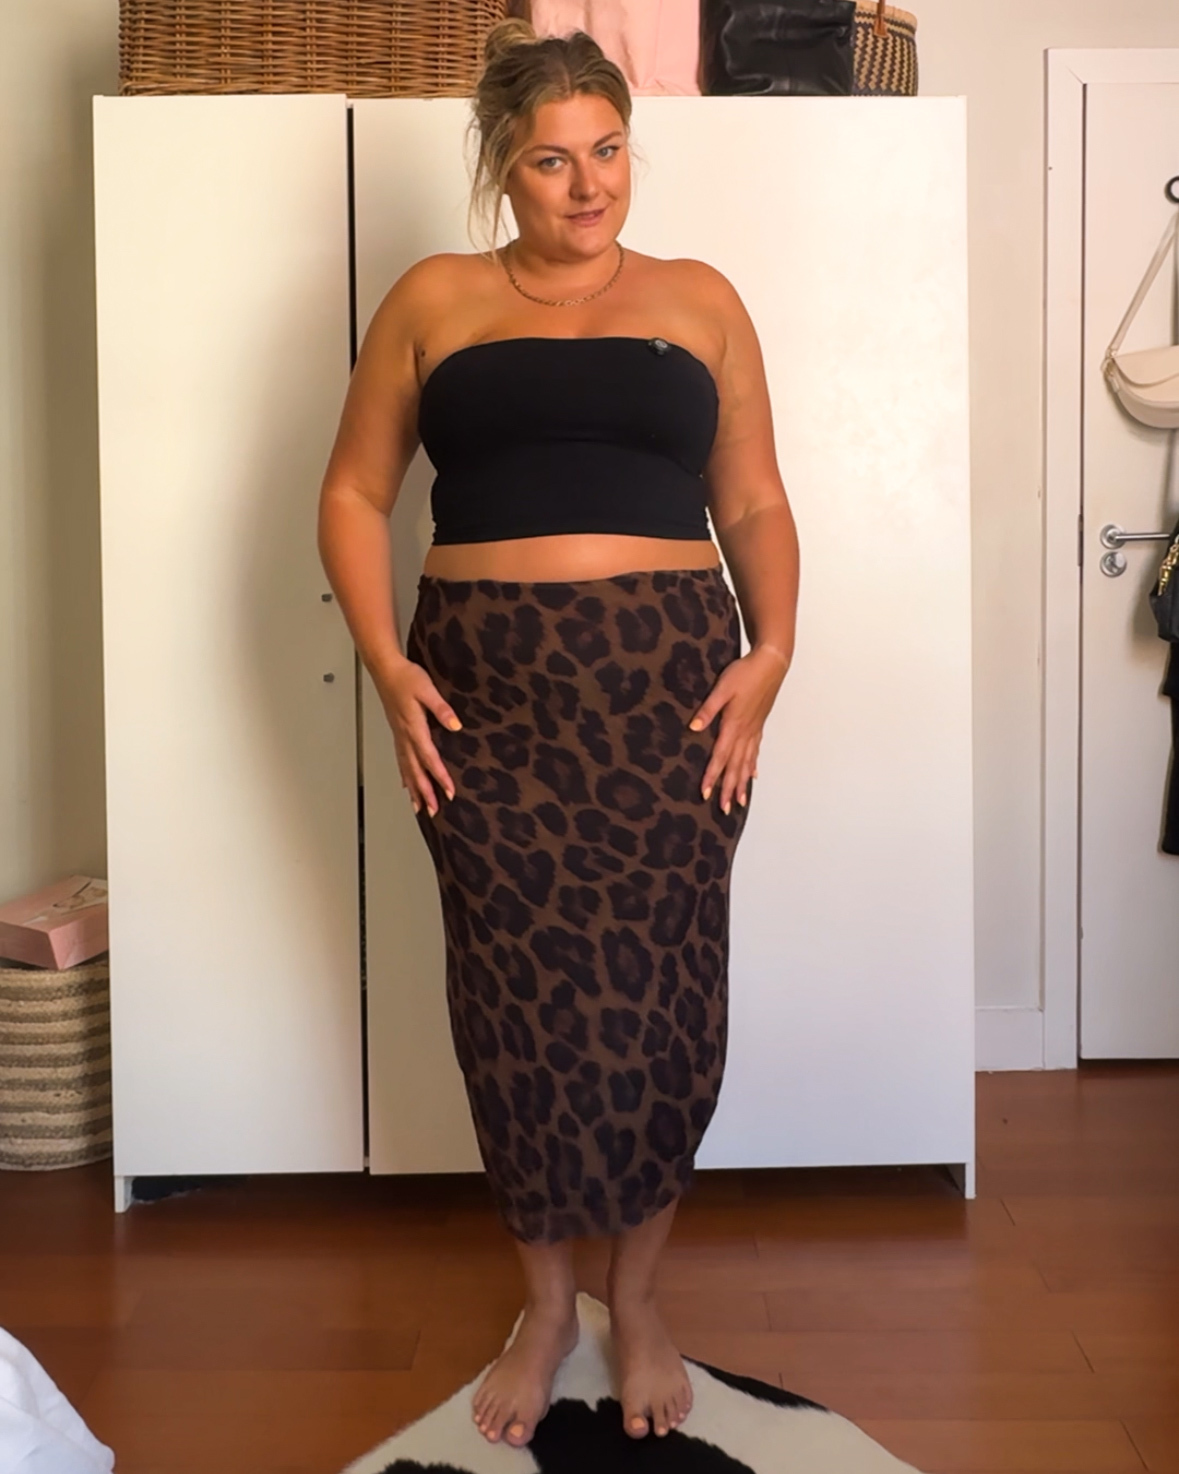 The influencer gave her honest verdict on all things from leopard print to ballet flats